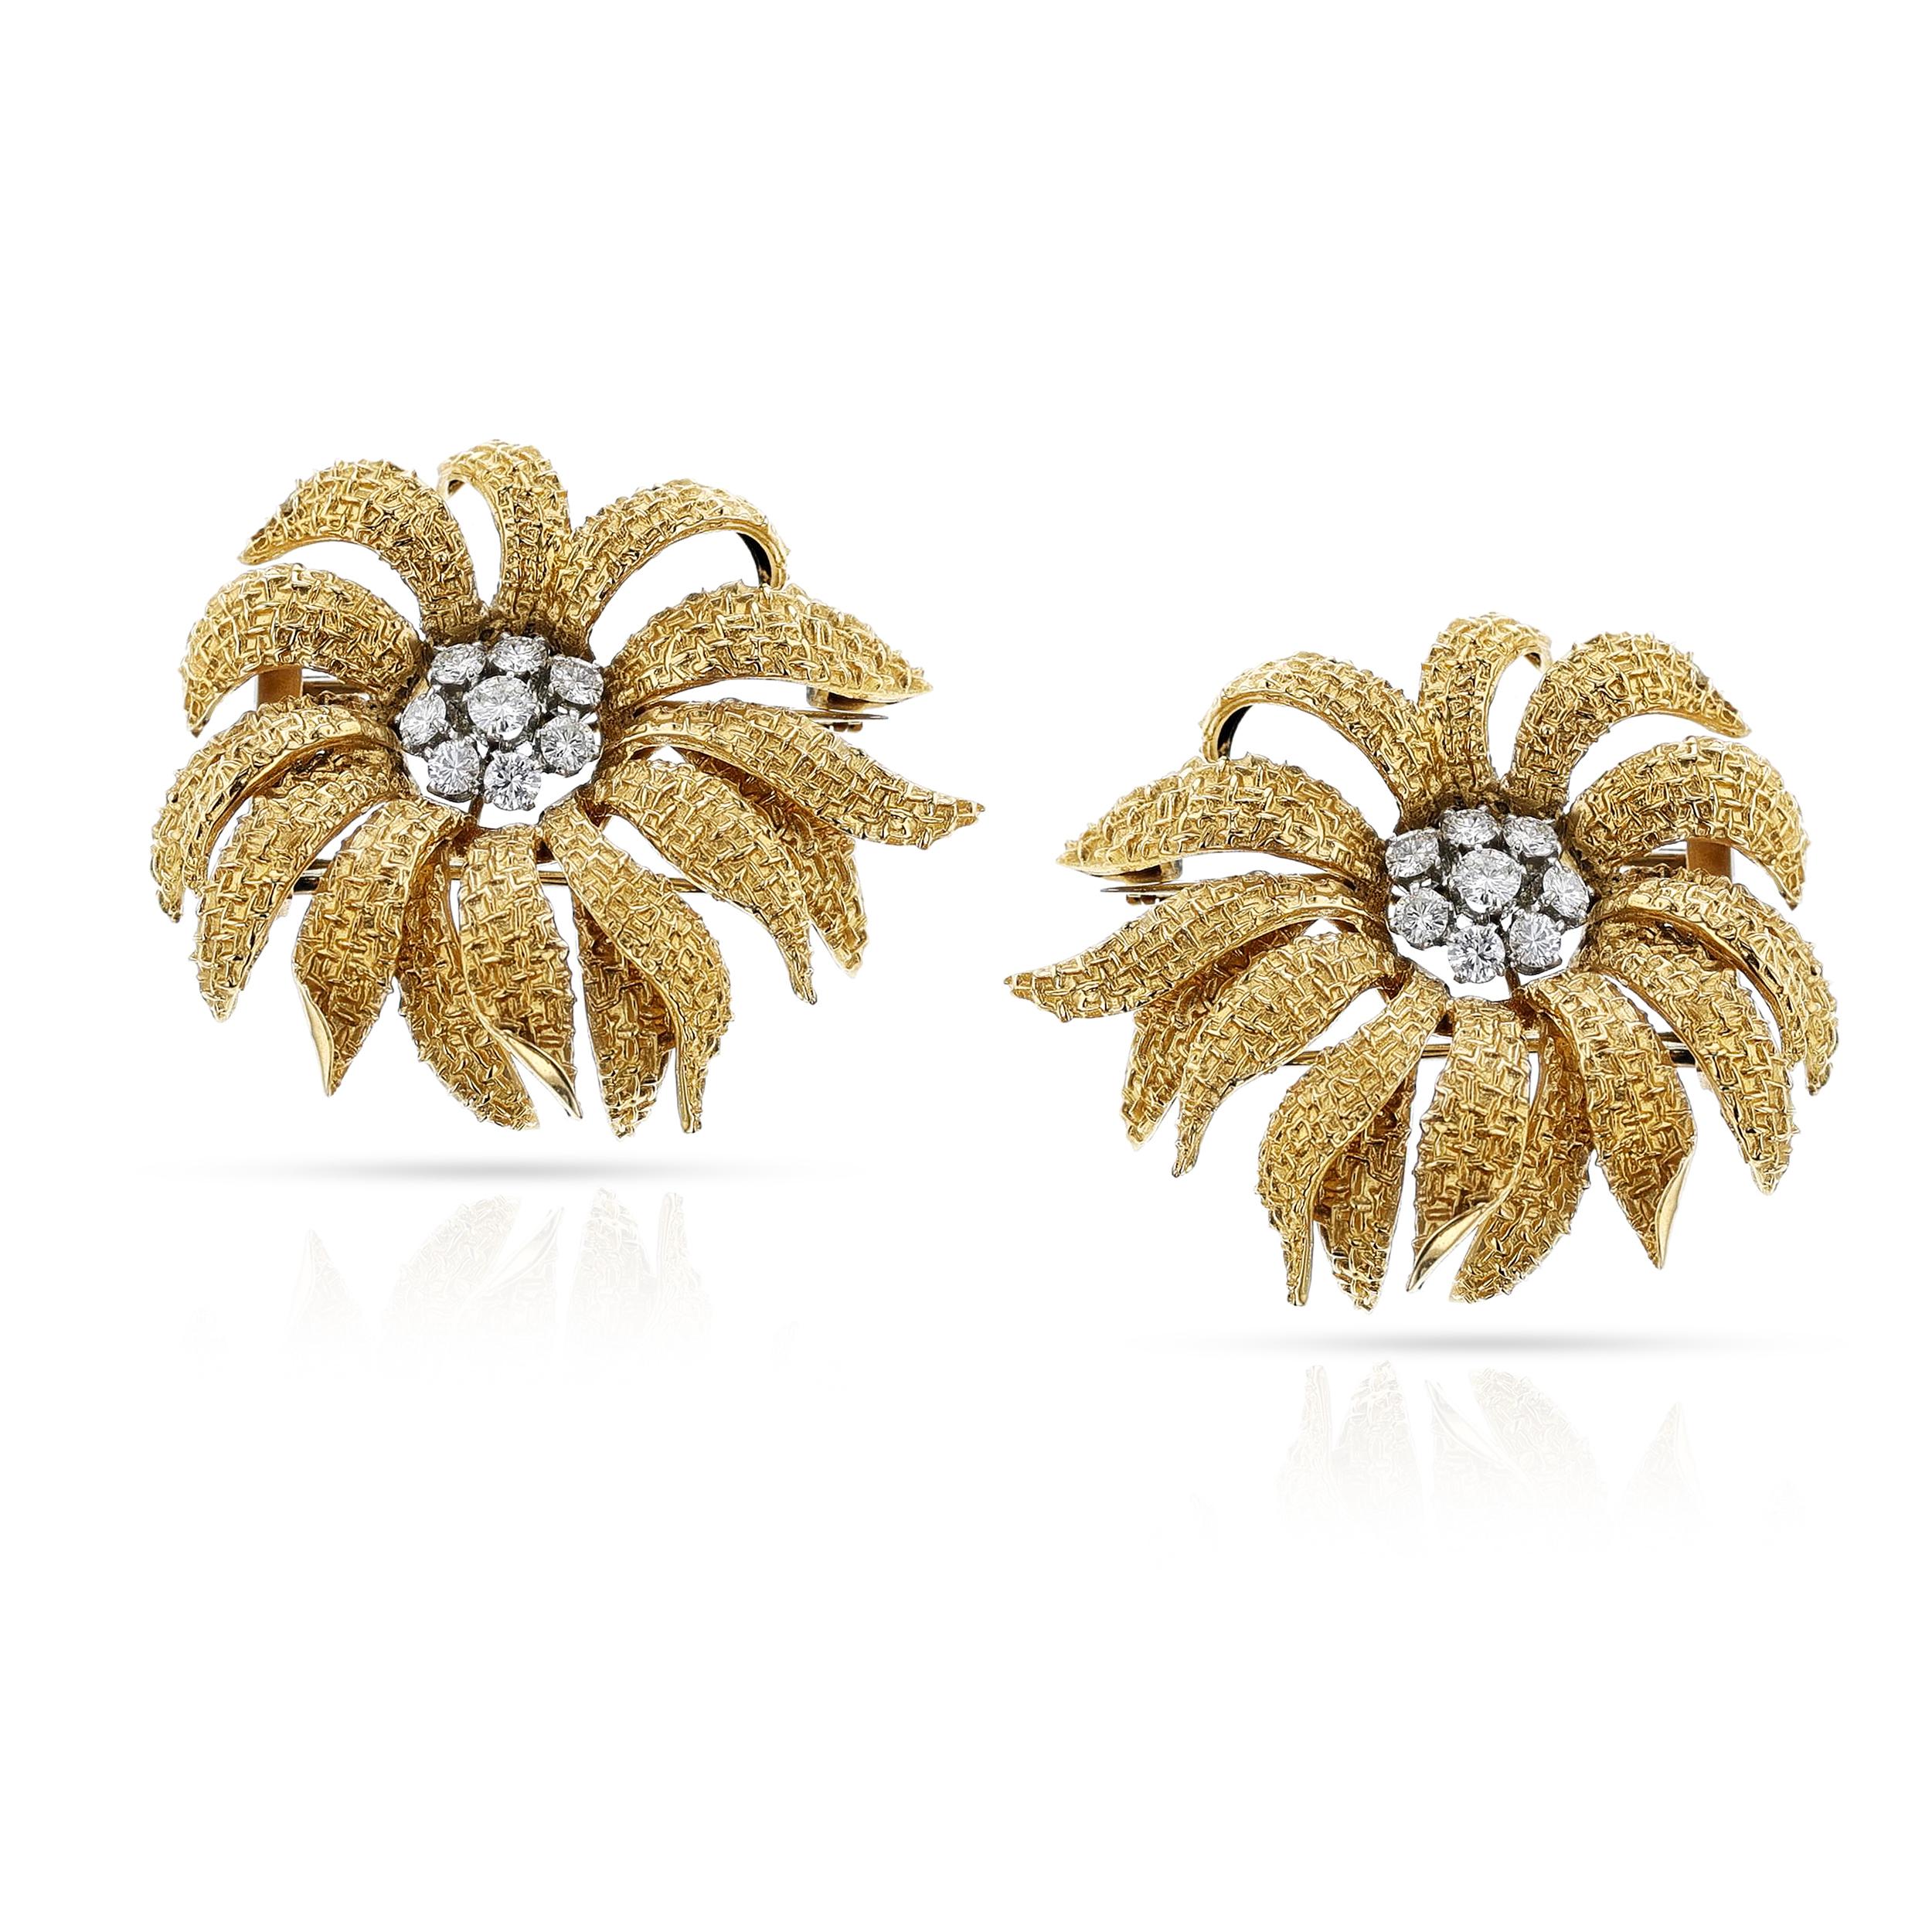 A pair of Van Cleef & Arpels Flower Brooches by Pery et Fils made in 18k Gold and with Diamonds. Each flower is designed with textured gold petals with diamonds. Paris, Circa 1980. Numbered. The dimensions are 1.75 x 1.50 inches, signed Van Cleef